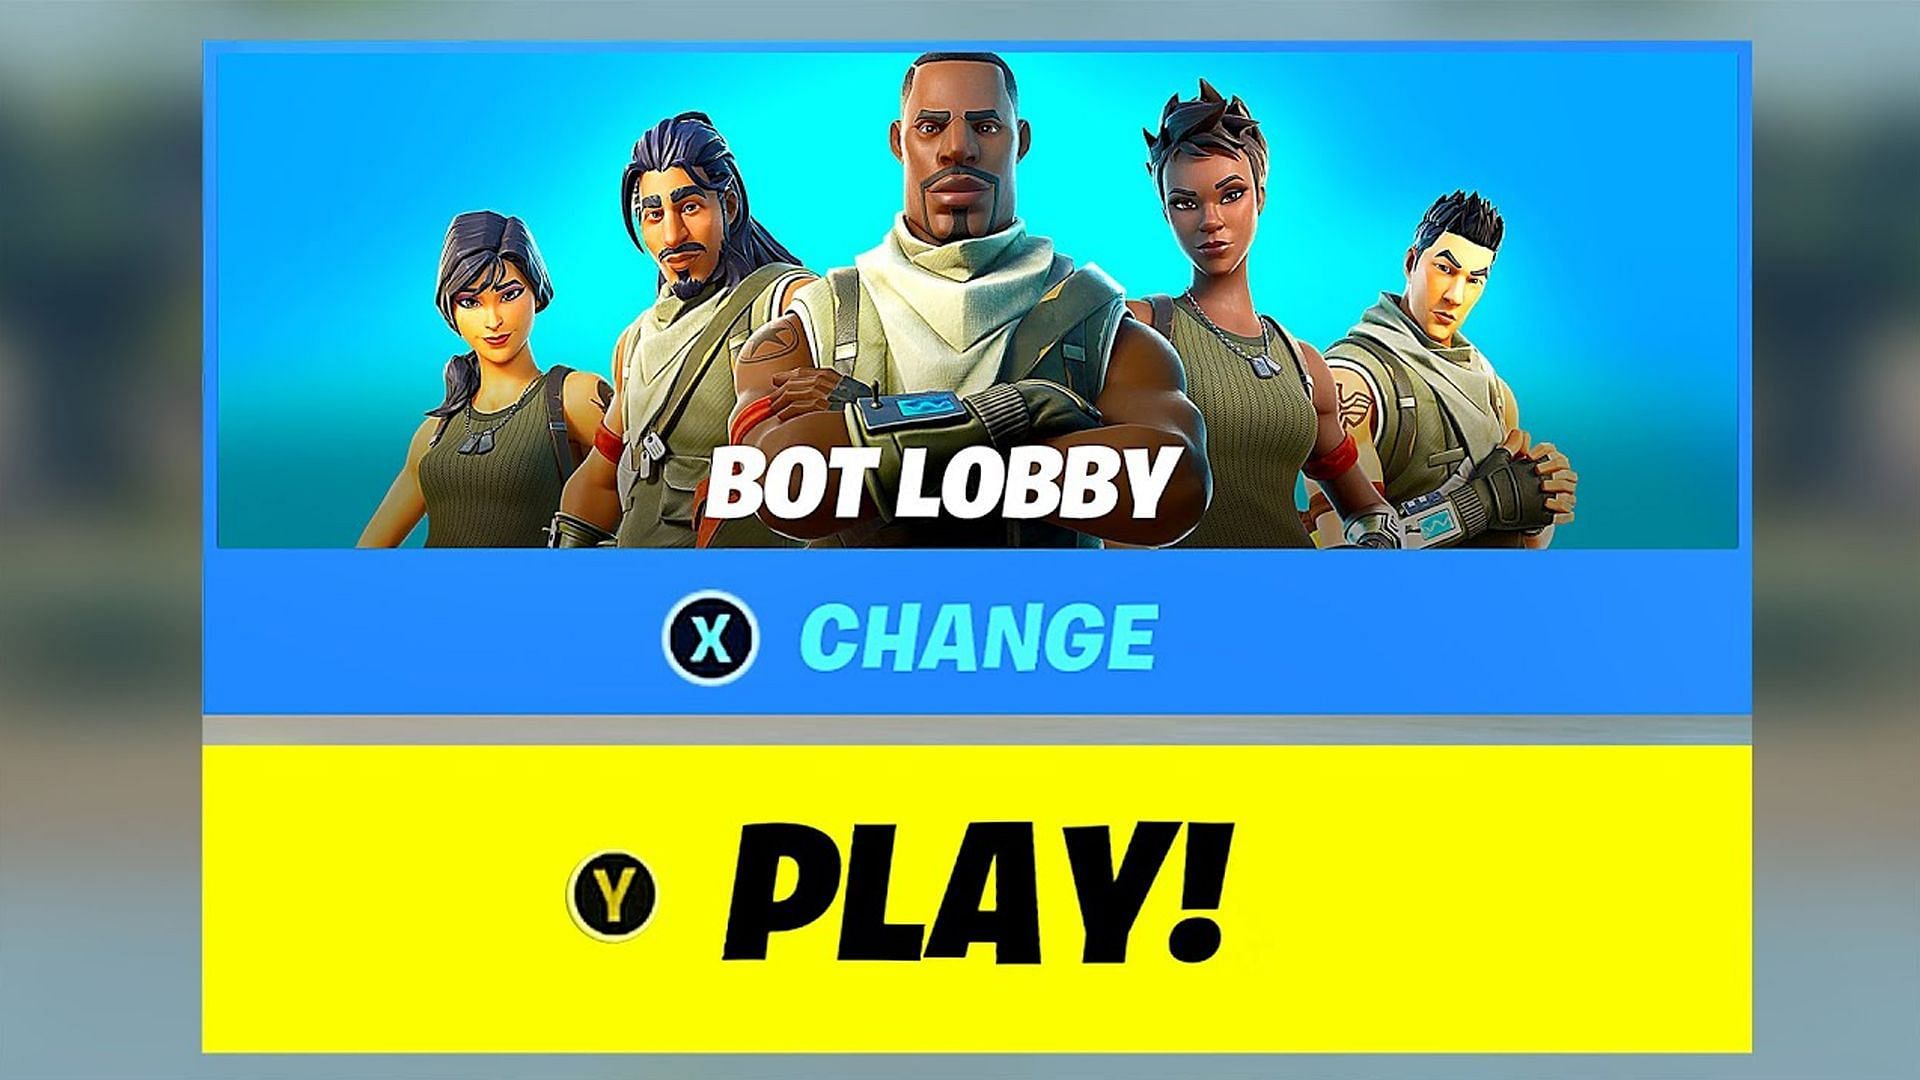 How to Join a Fortnite Custom Matchmaking Lobby